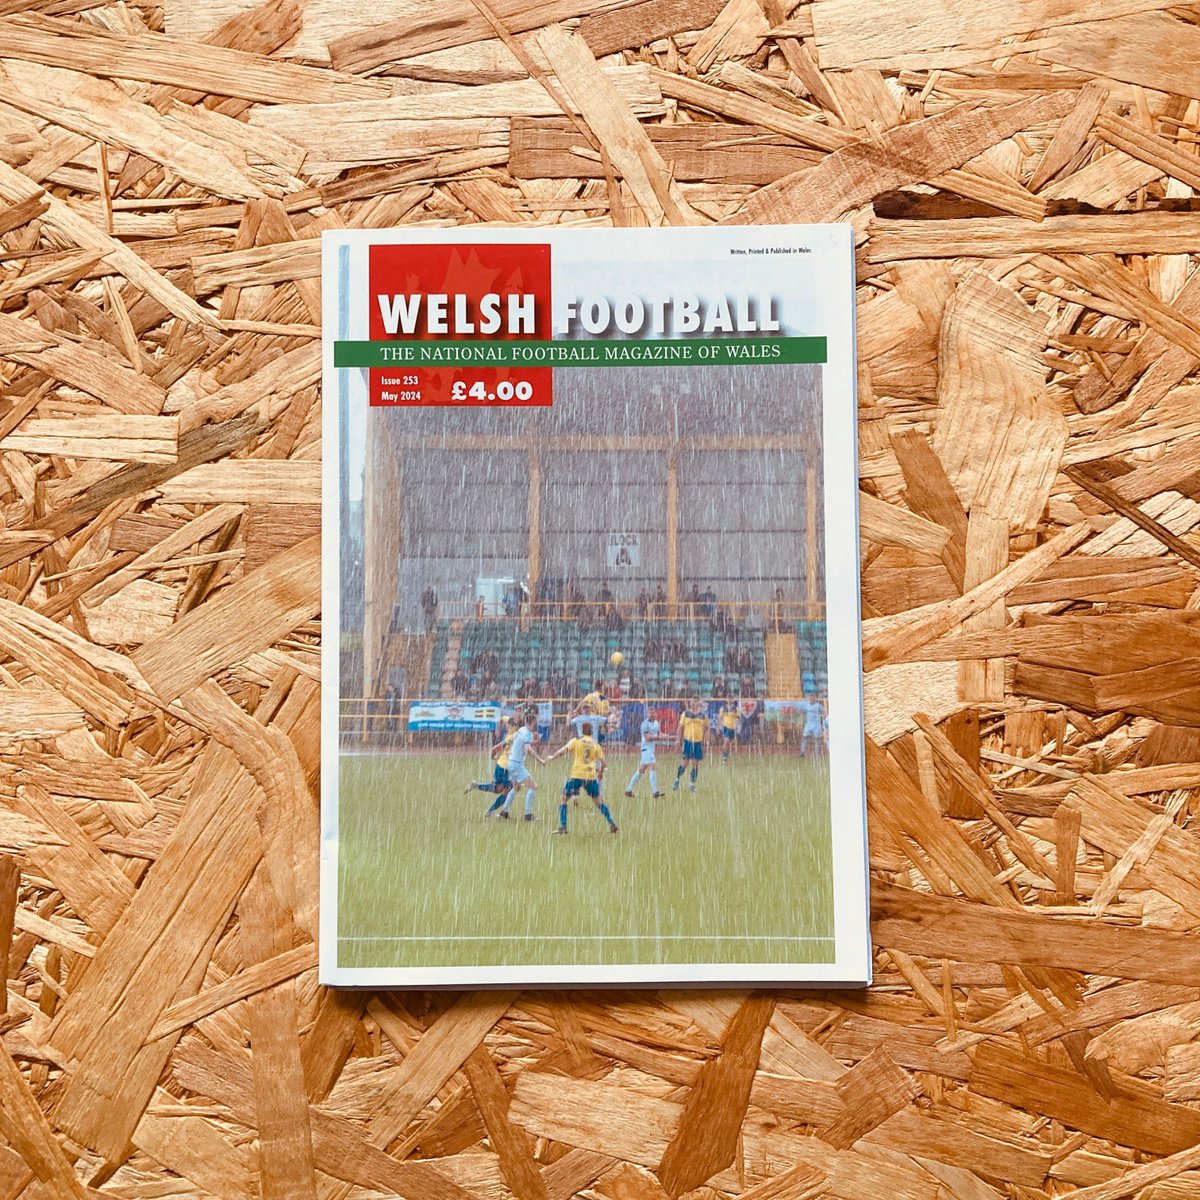 𝐍𝐄𝐖 | WELSH FOOTBALL MAGAZINE #253 🏴󠁧󠁢󠁷󠁬󠁳󠁿 We've added the most recent issue by @CollinsWFM covering all levels in the Welsh league system, including a big feature on @penycaefc1, a look at @cwmalbionafc + much more. 🛒 stanchionbooks.com/collections/we…